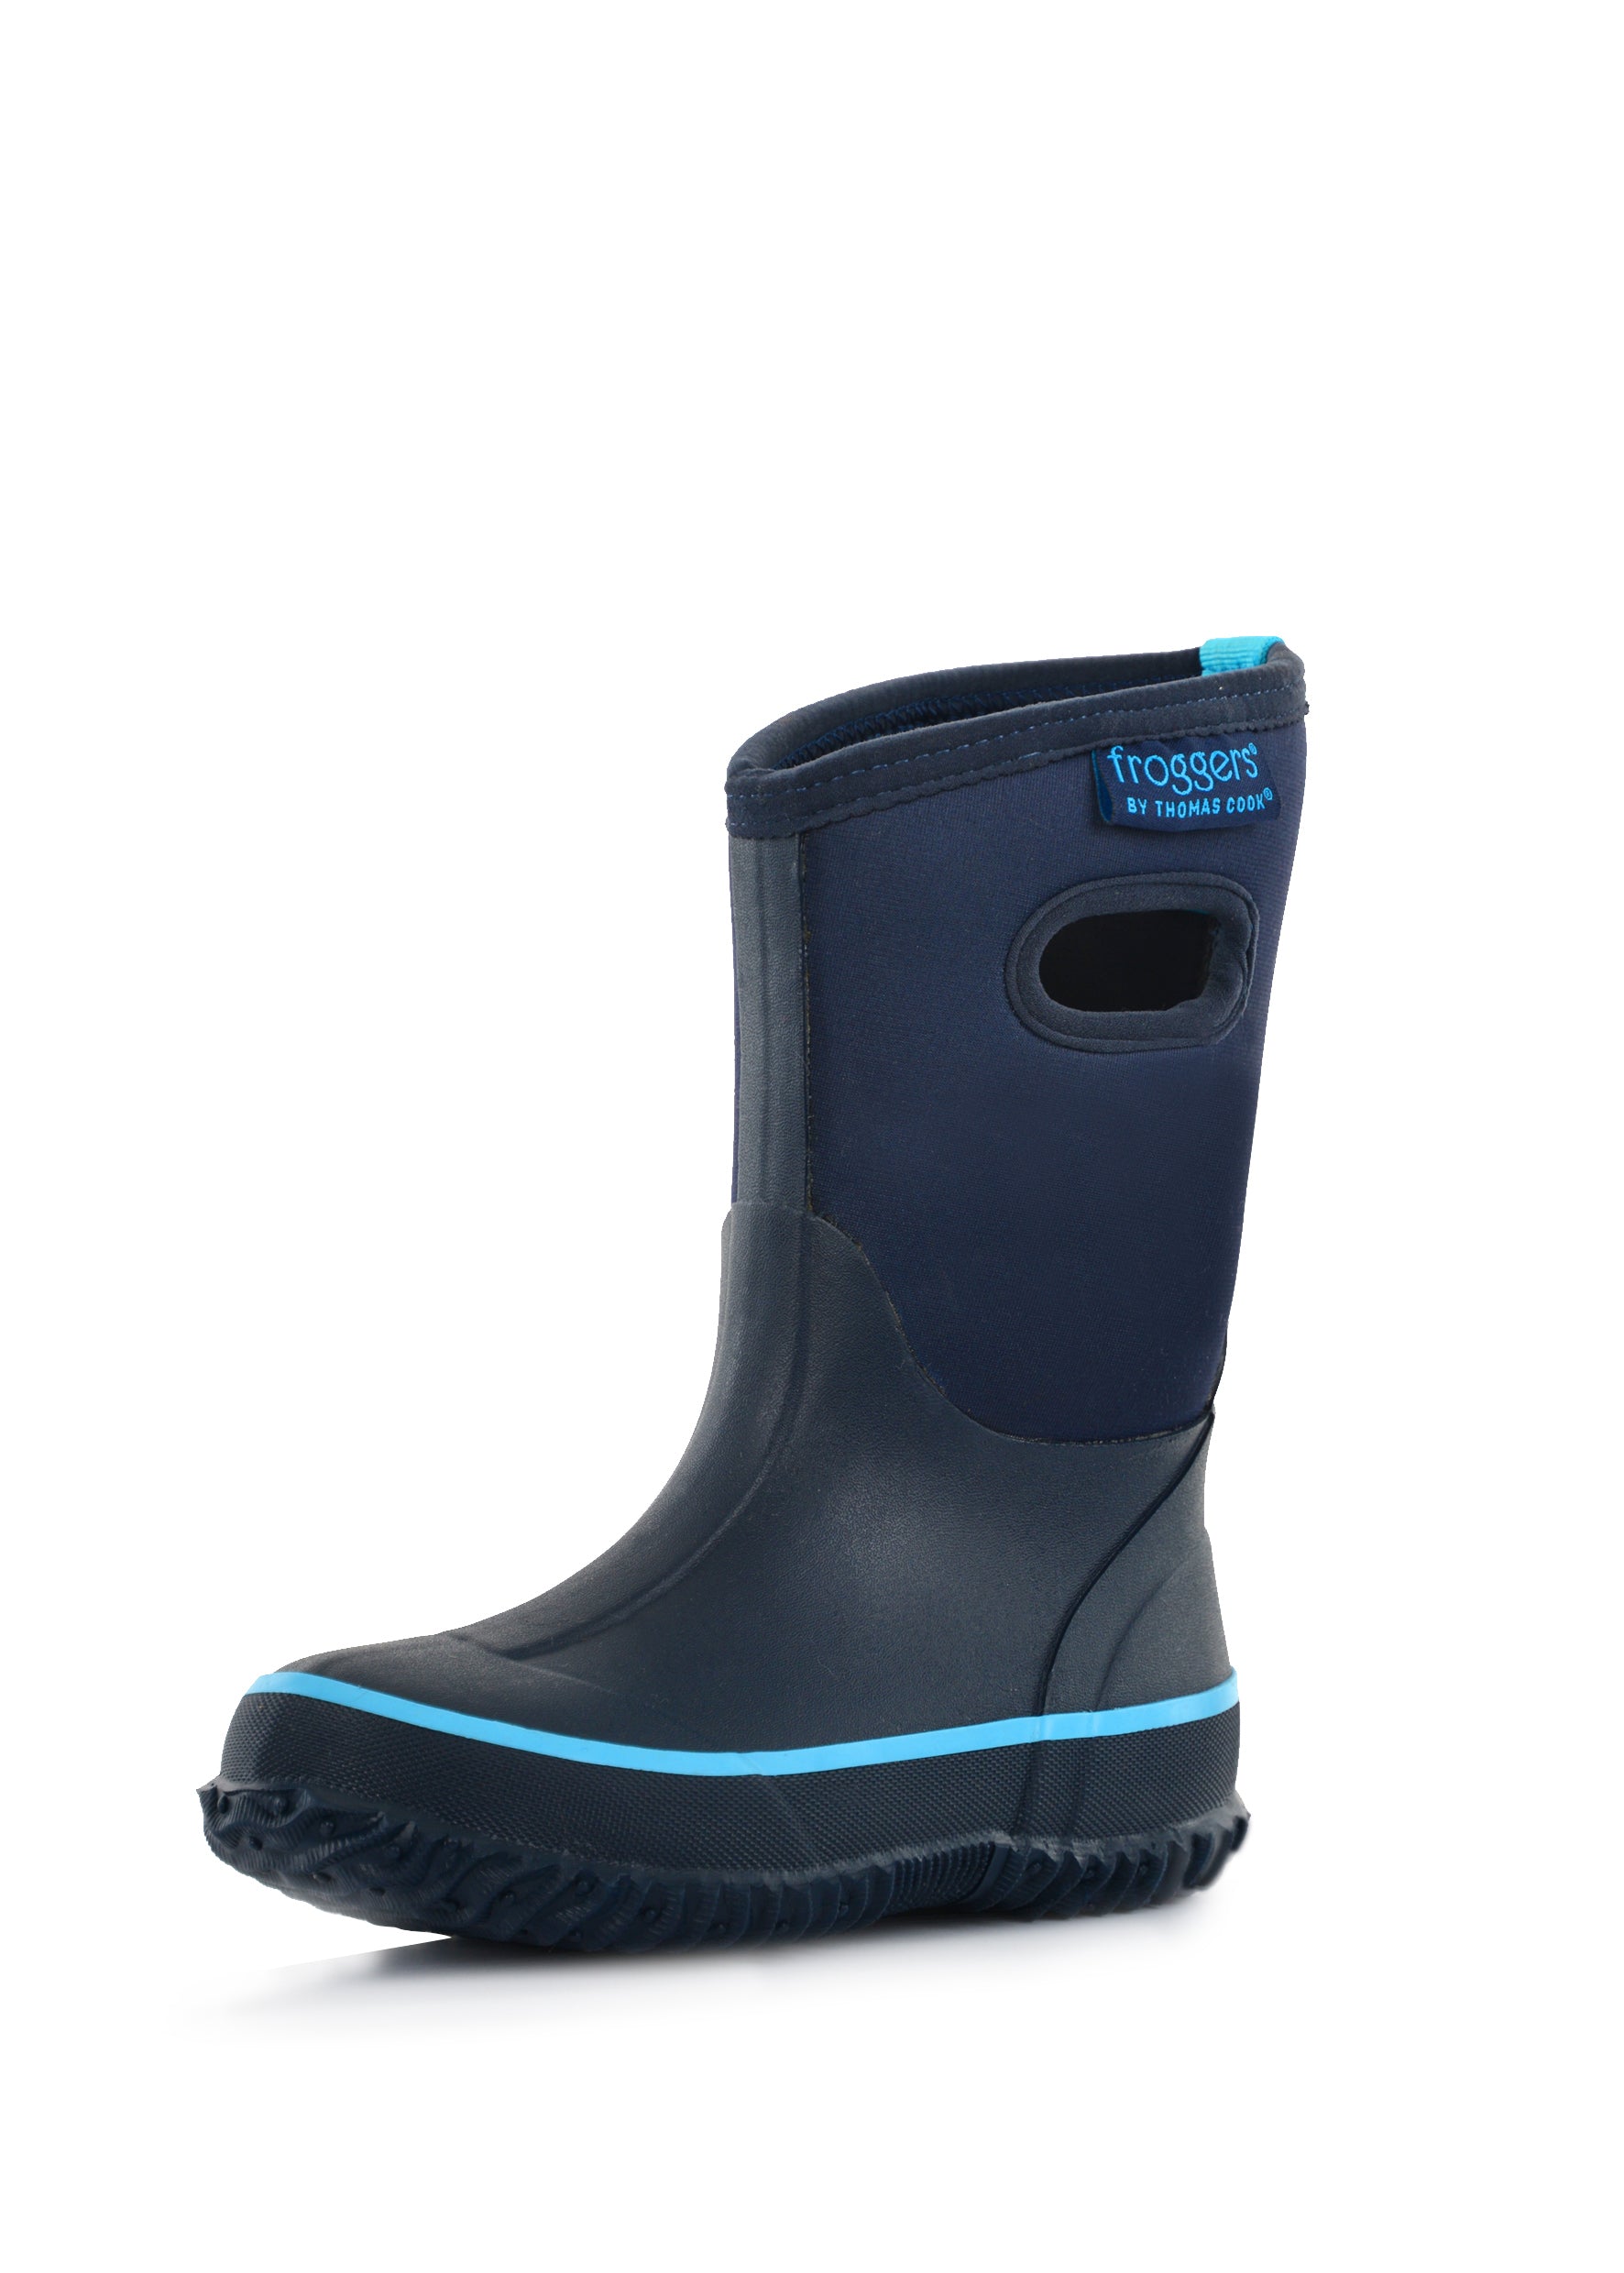 Thomas Cook Kids Froggers Bridgewater Boots - CLEARANCE